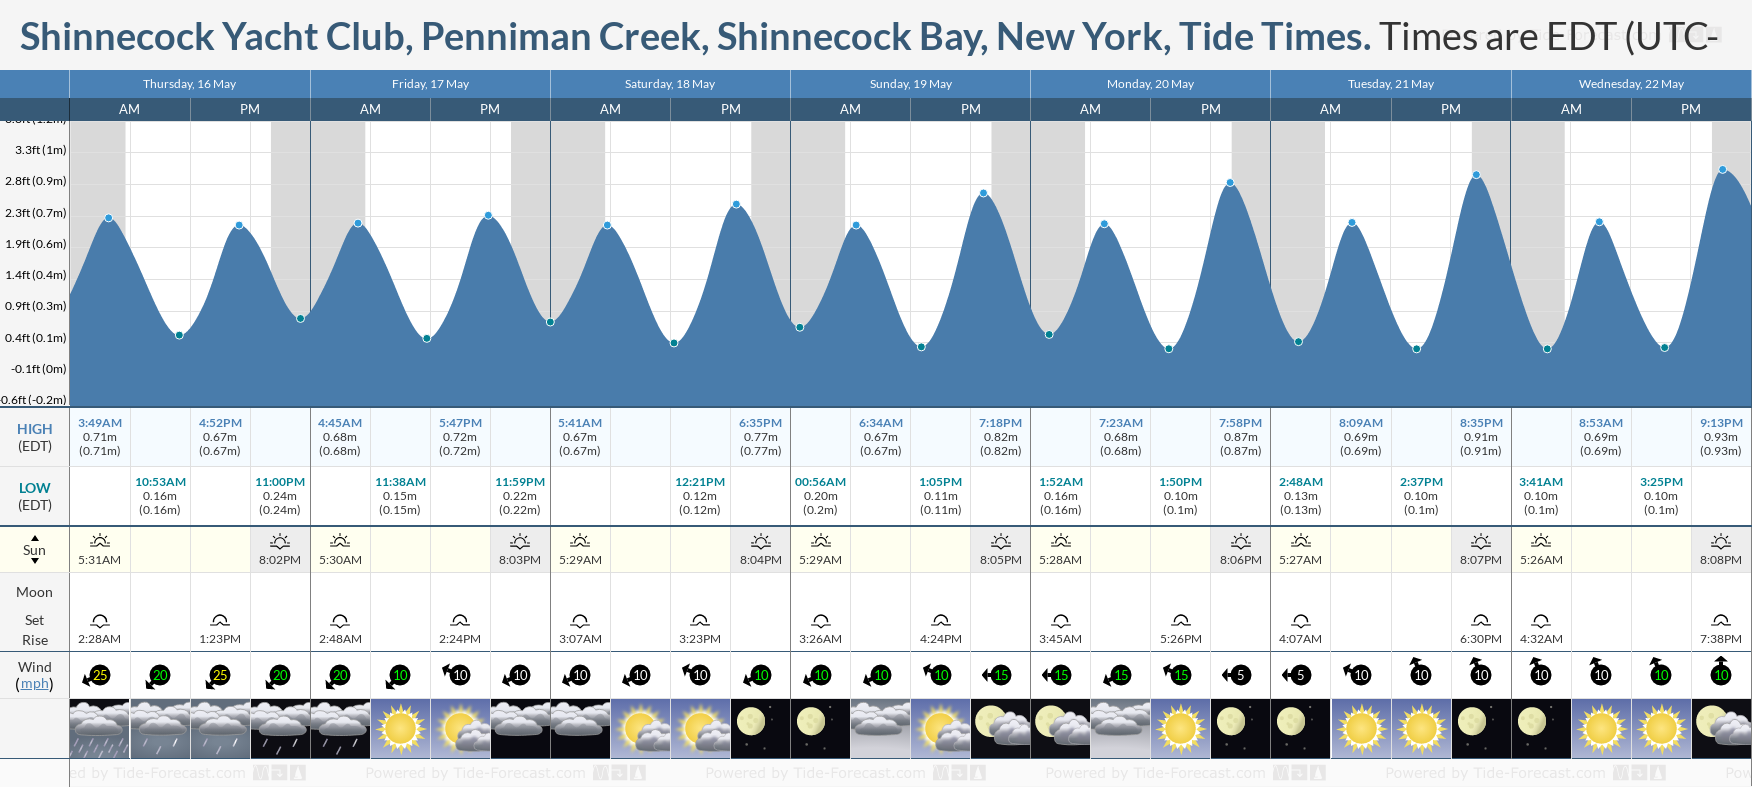 Shinnecock Yacht Club, Penniman Creek, Shinnecock Bay, New York Tide Chart including high and low tide times for the next 7 days